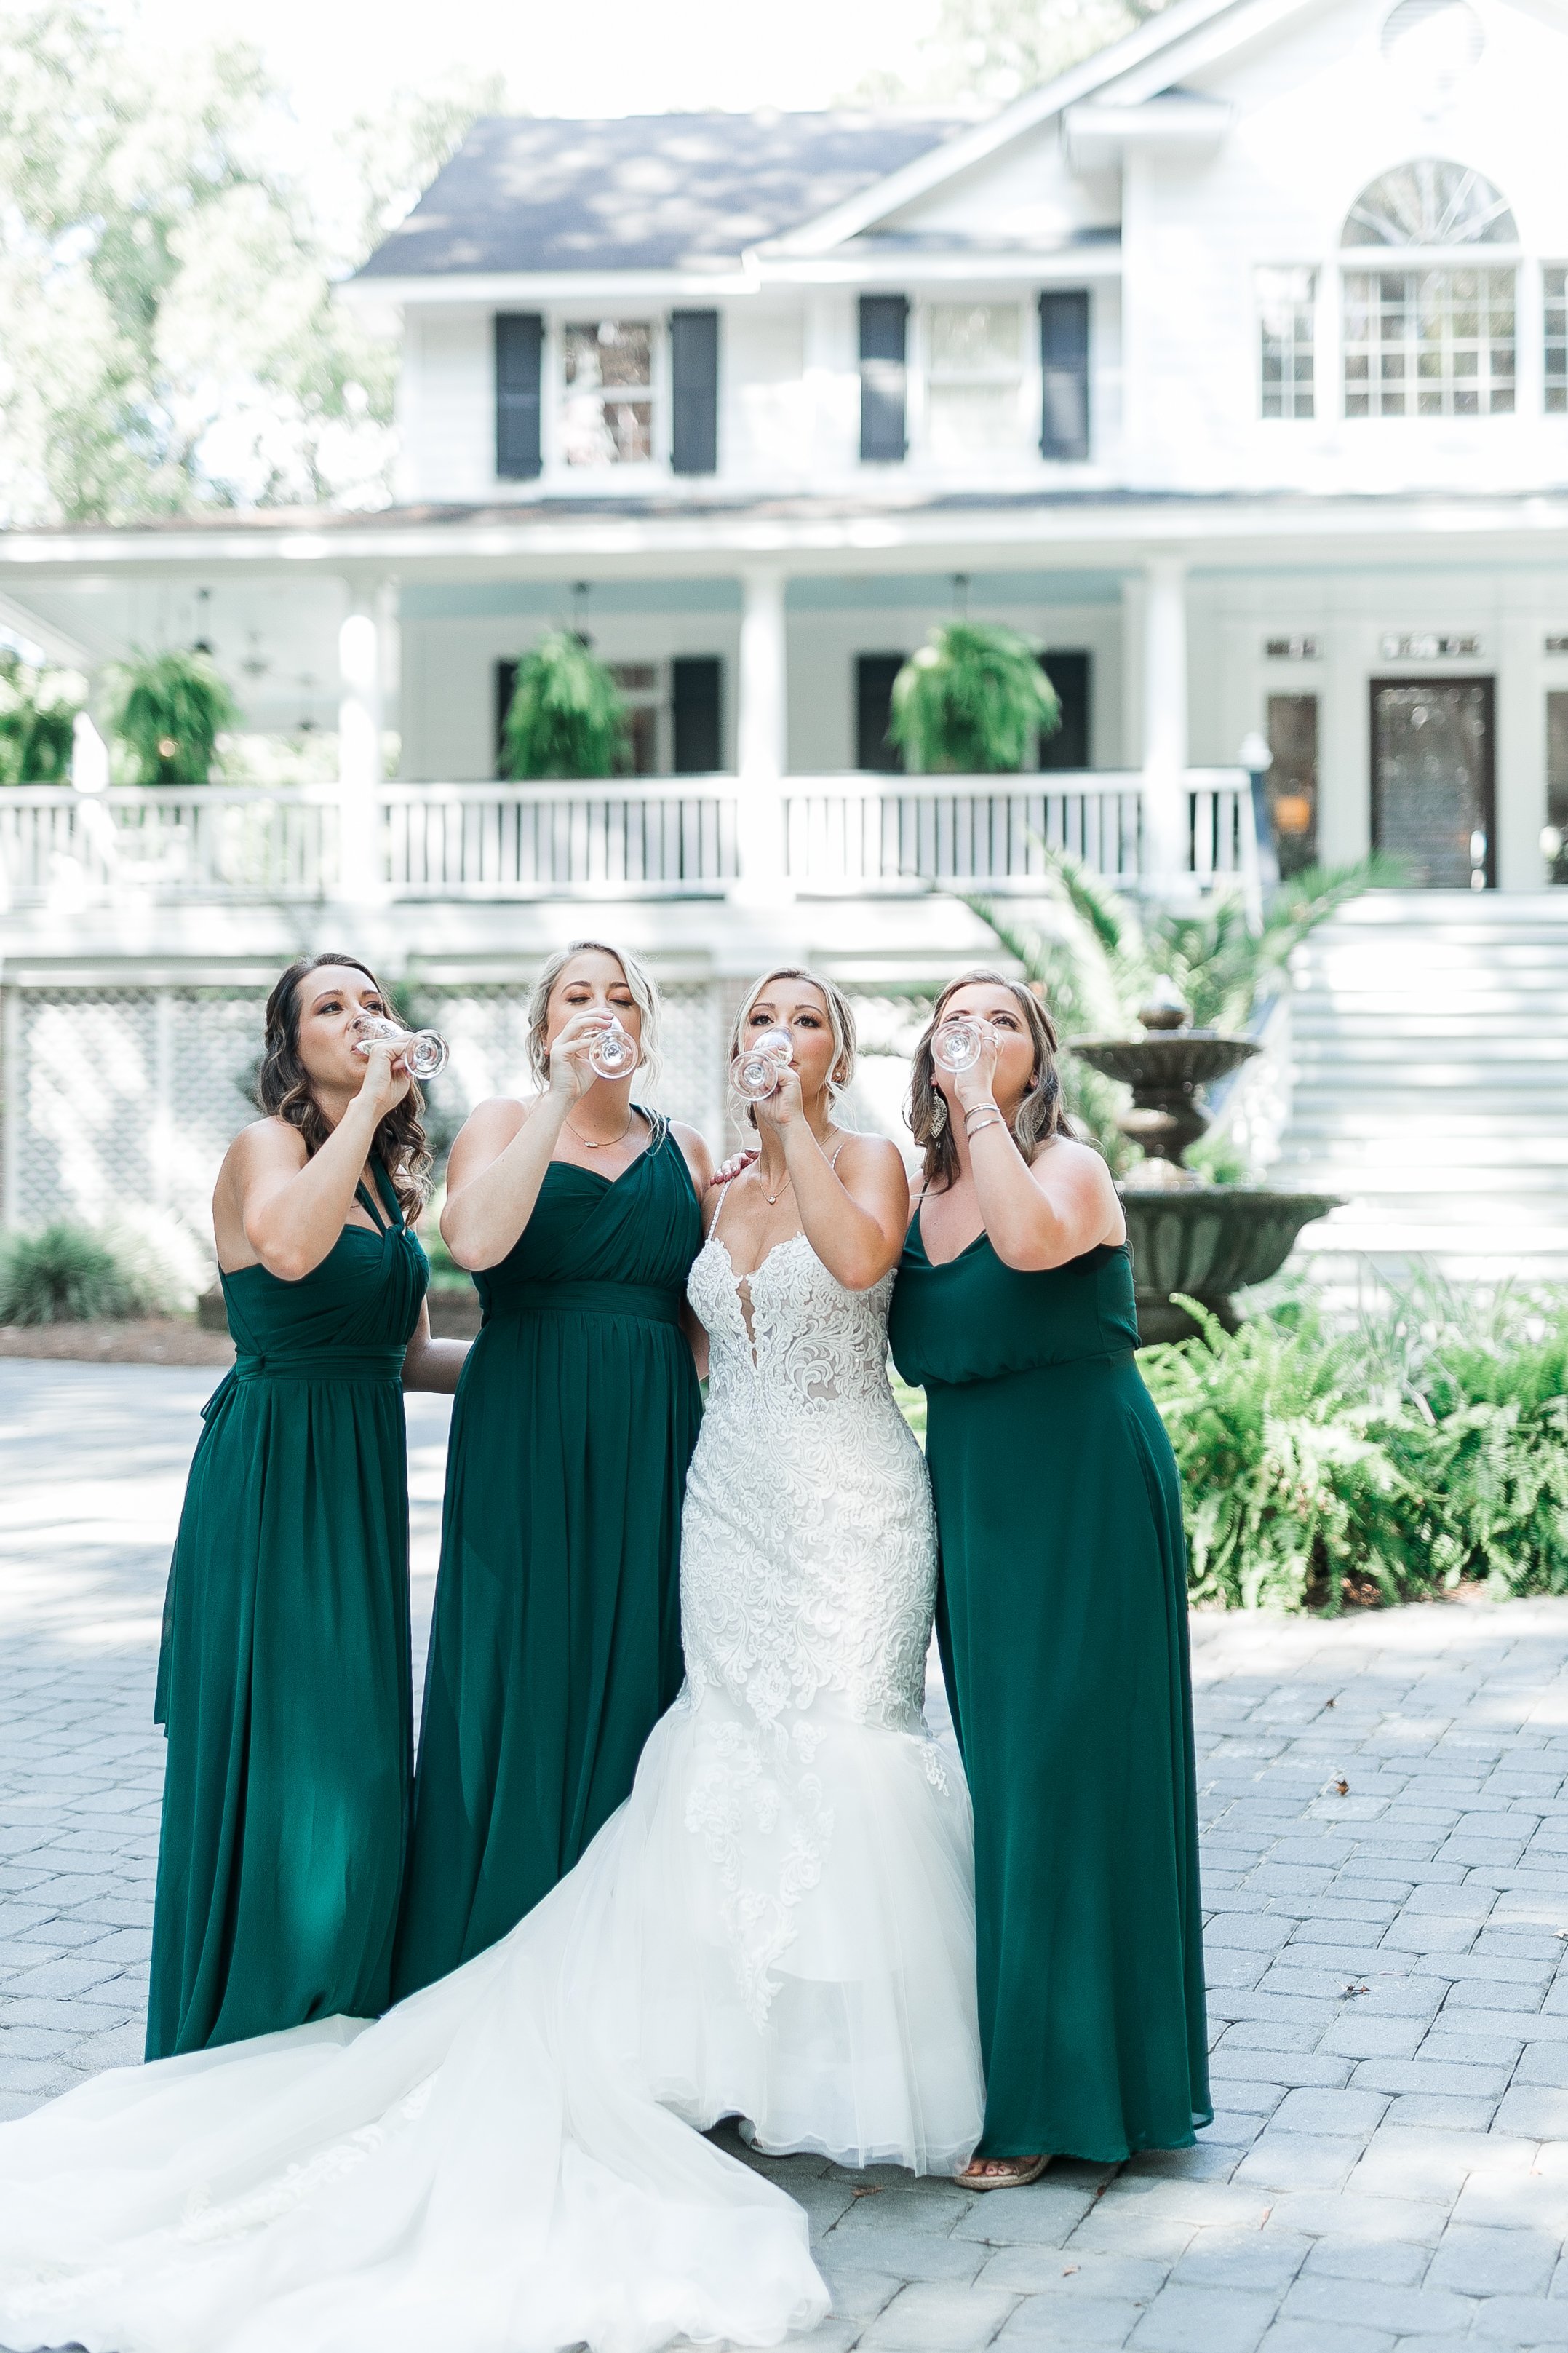 ivory-and-beau-bride-and-florals-wedding-blog-real-bride-real-wedding-savannah-wedding-southern-wedding-mackey-house-alistaire-maggie-sottero-wedding-dress-organic-natural-neutral-wedding-flowers-wedding-florist-savannah-Evan+MerrittWeddingDay_-25.jpg